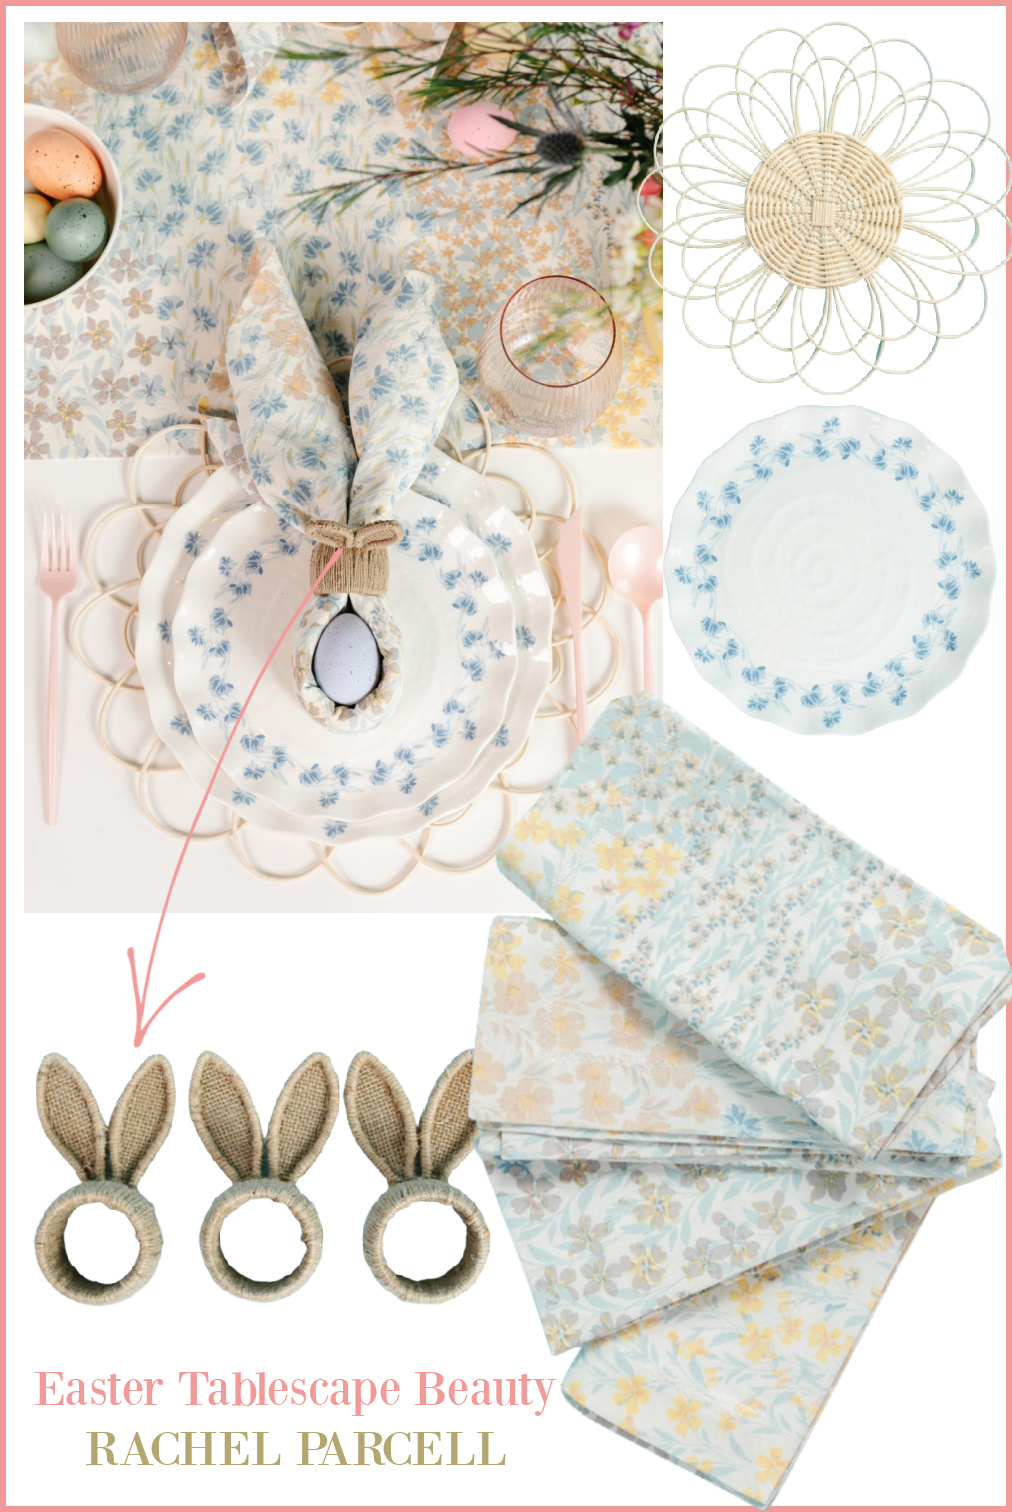 Easter Tablescape Beauty - Rachel Parcell pastel pretty holiday style!